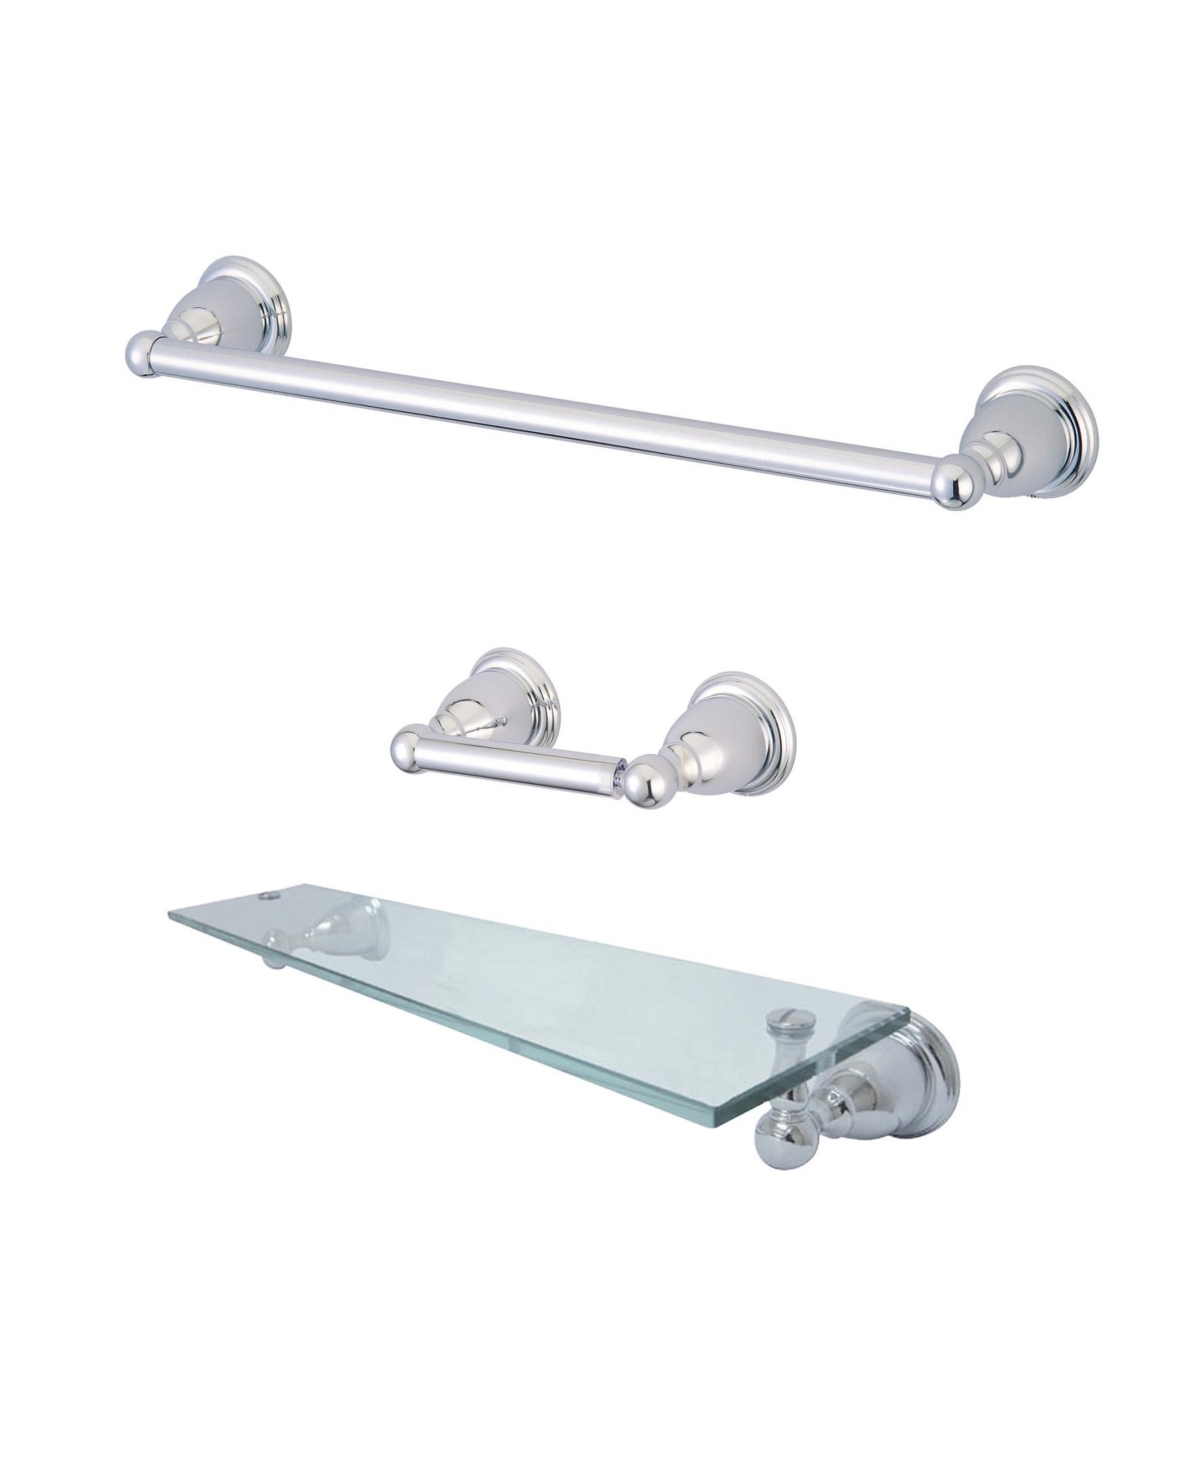 Kingston Brass Heritage 3-Pc. Bathroom Accessory Set in Polished Chrome Bedding